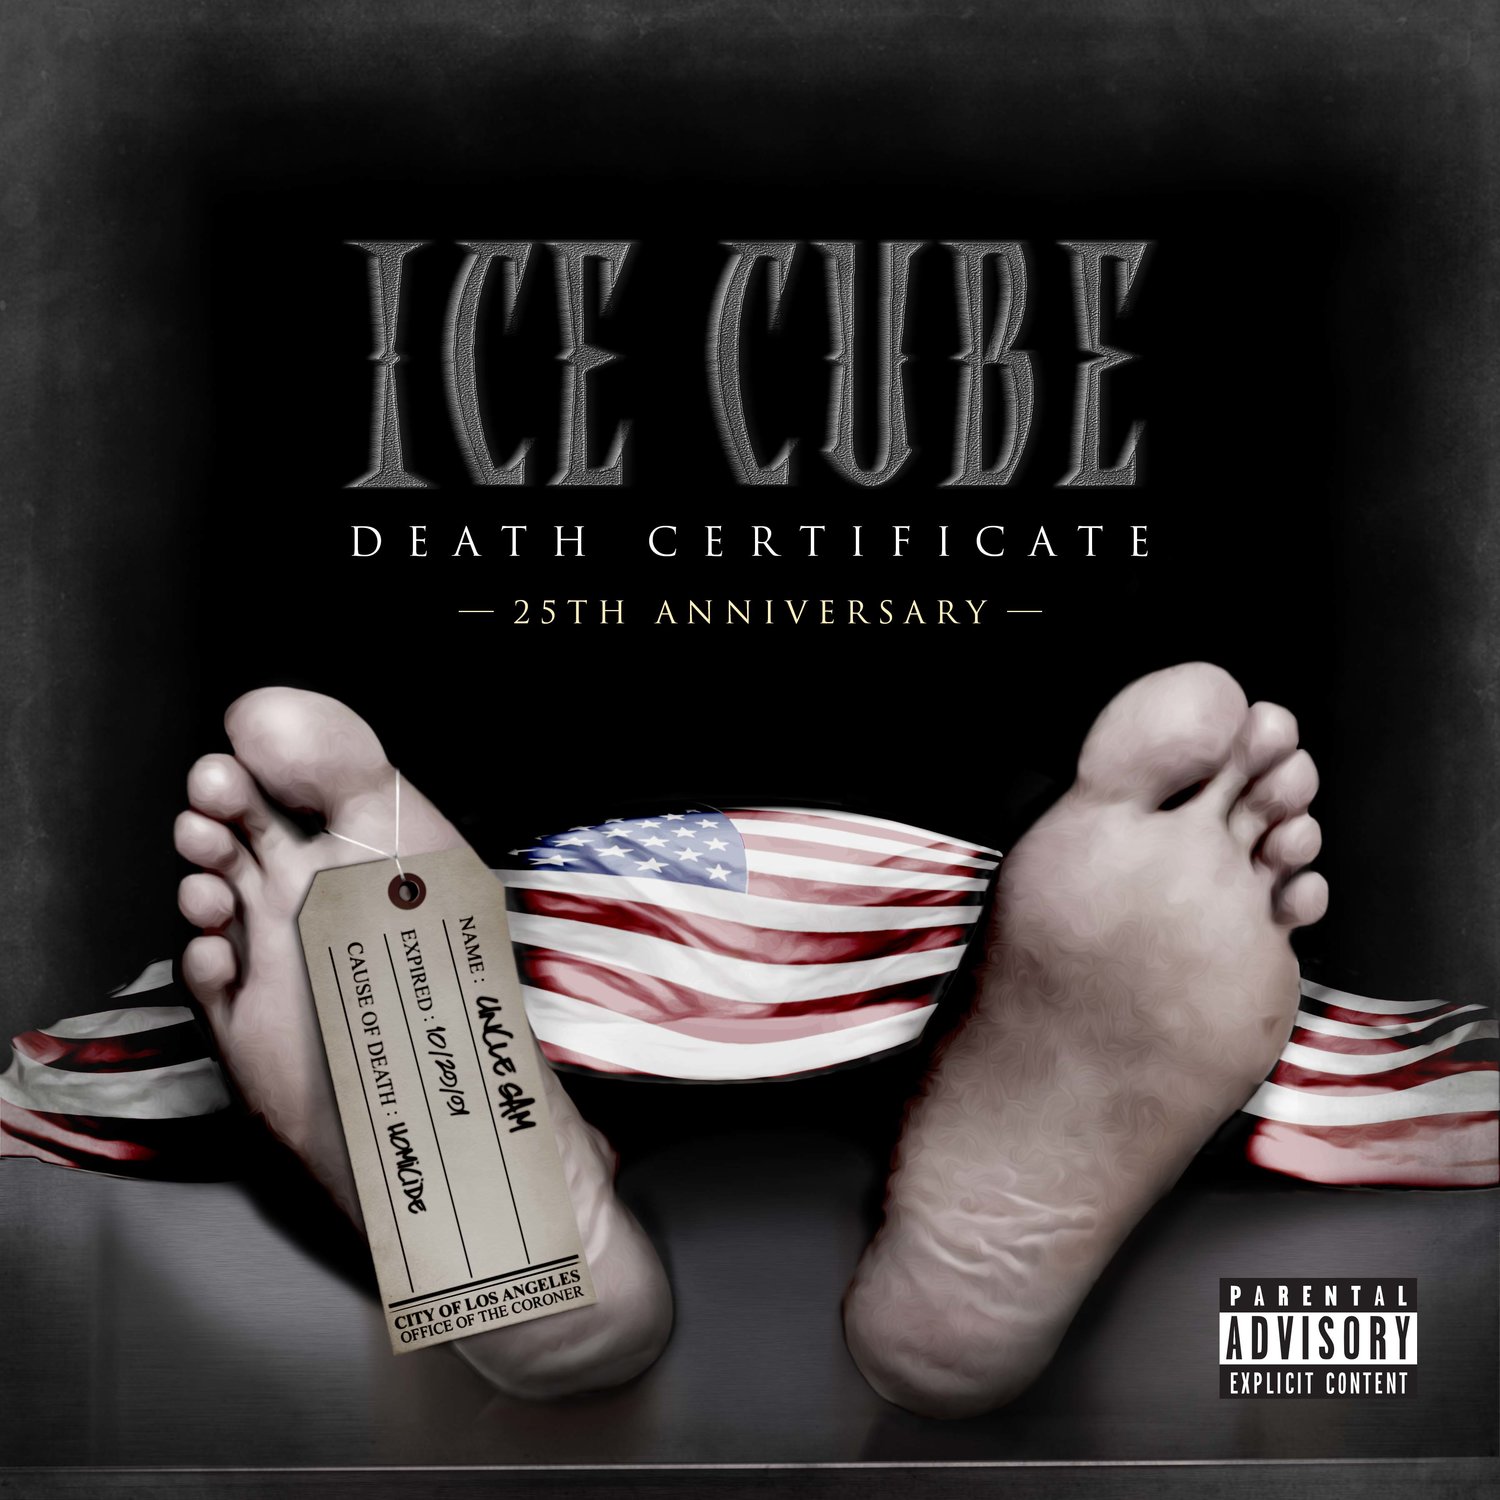 Ice Cube discography - Wikipedia